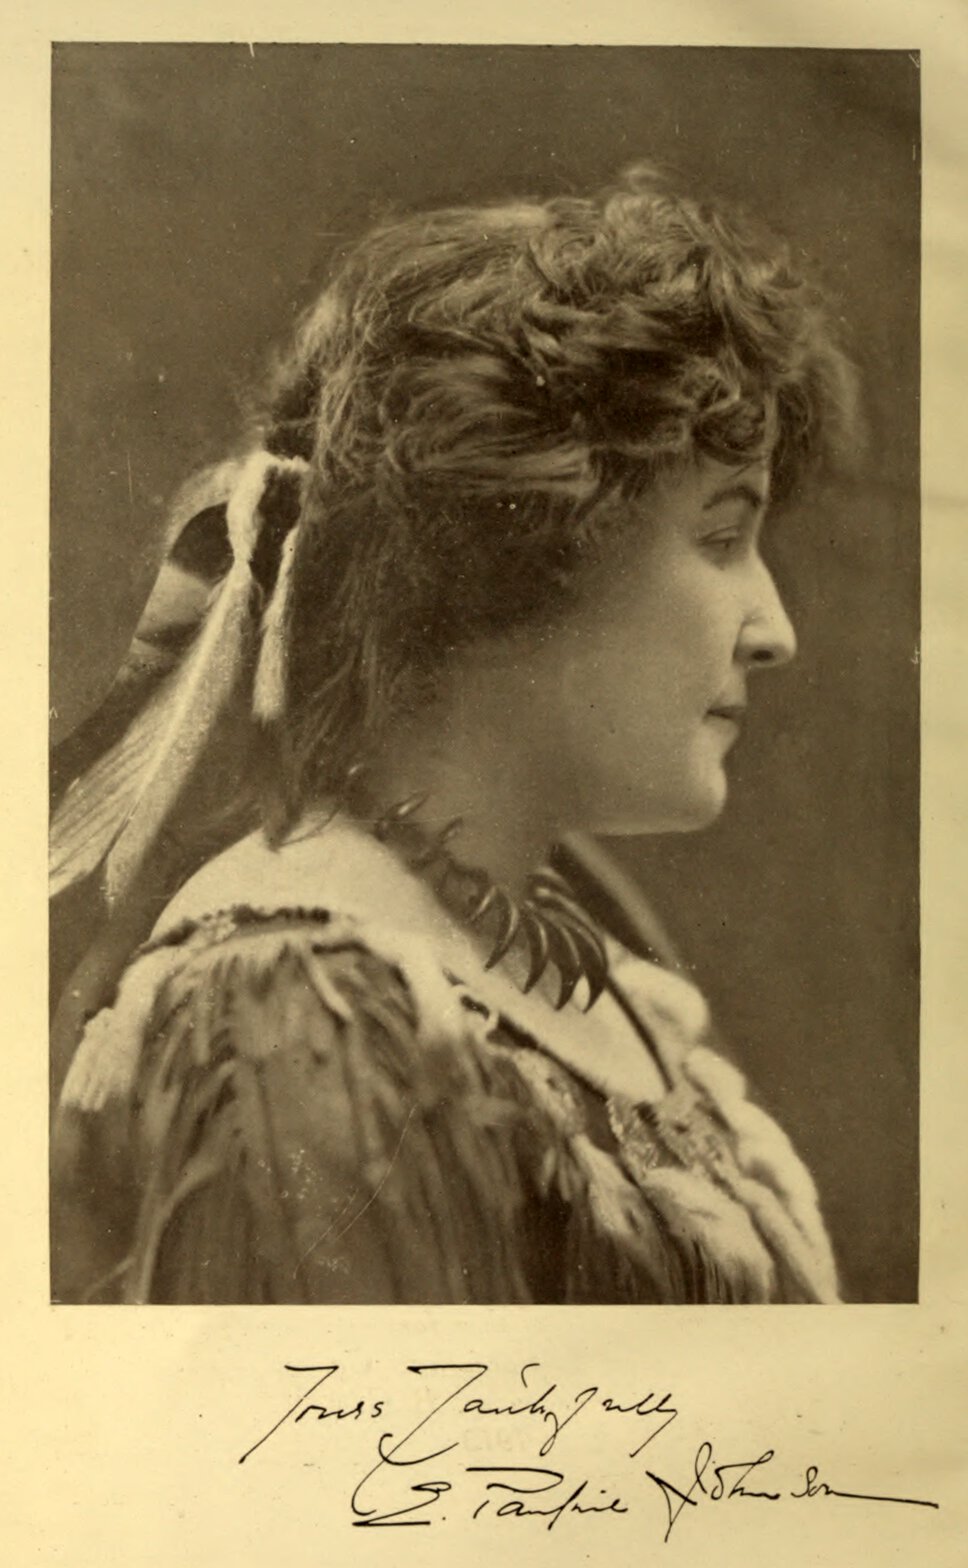 Head and shoulders portrait of E. Pauline Johnson, signed "Yours Faithfully" with her name.